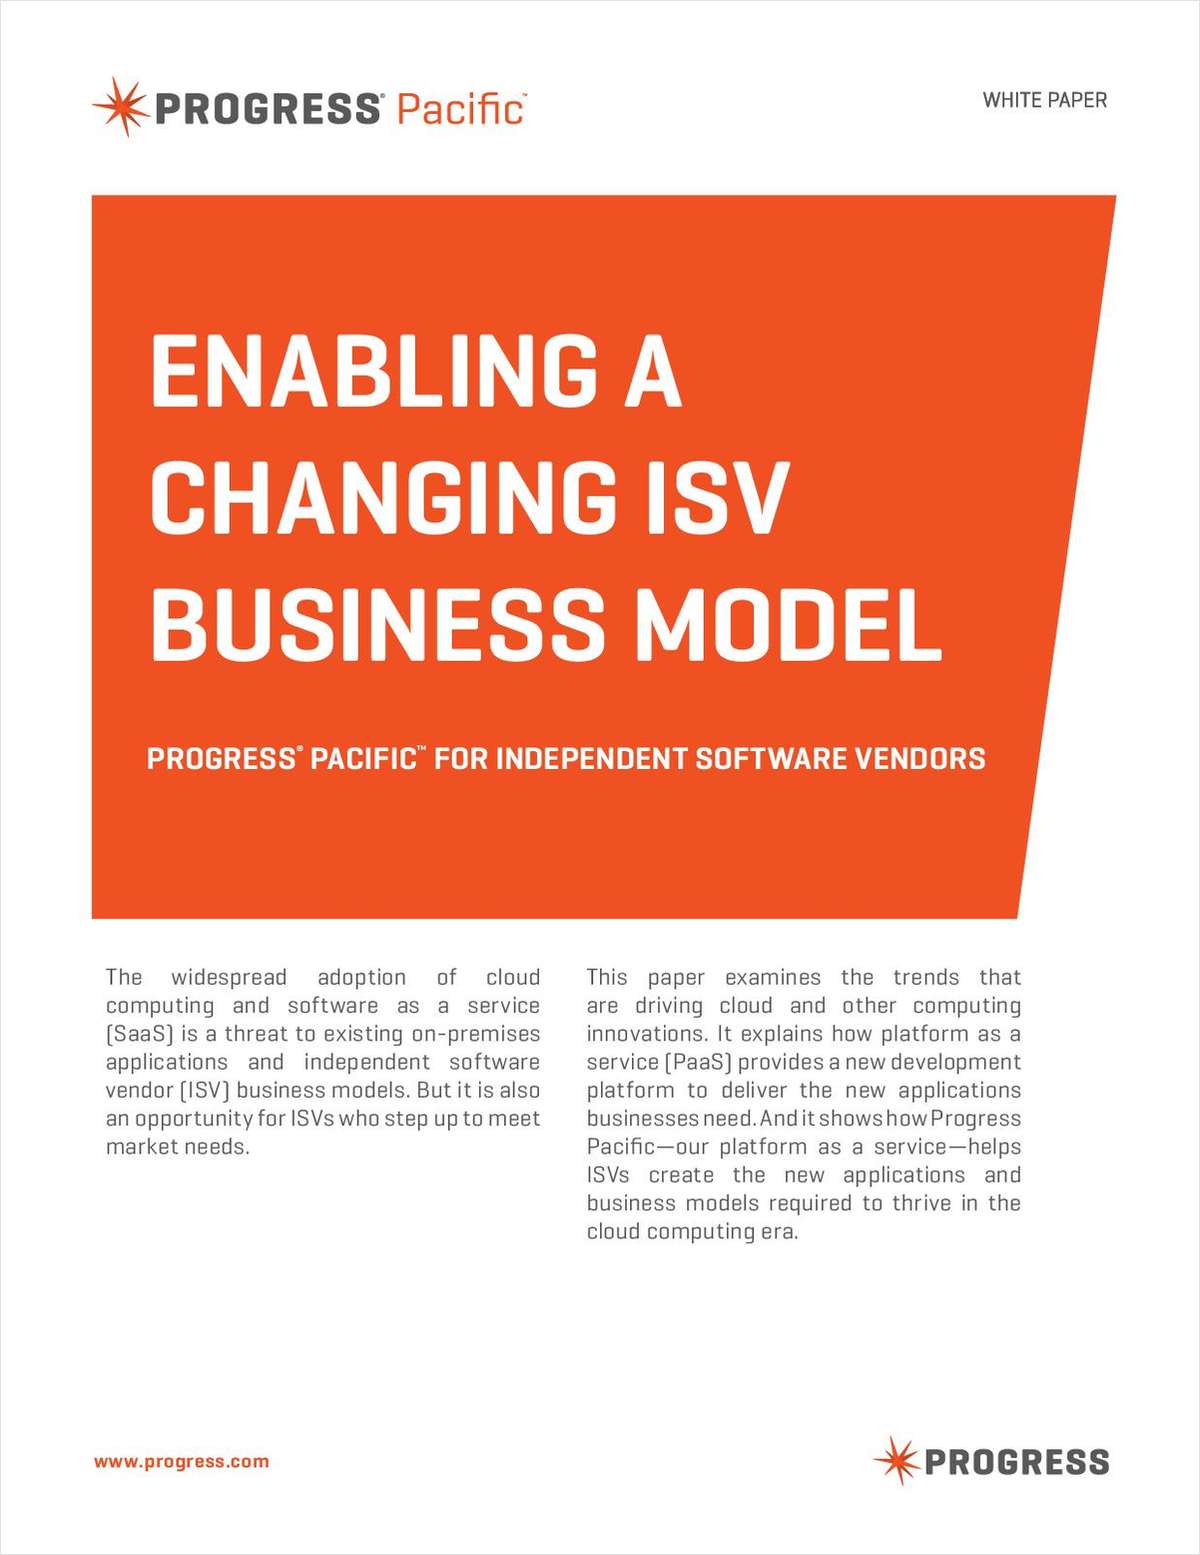 Enabling a Changing ISV Business Model